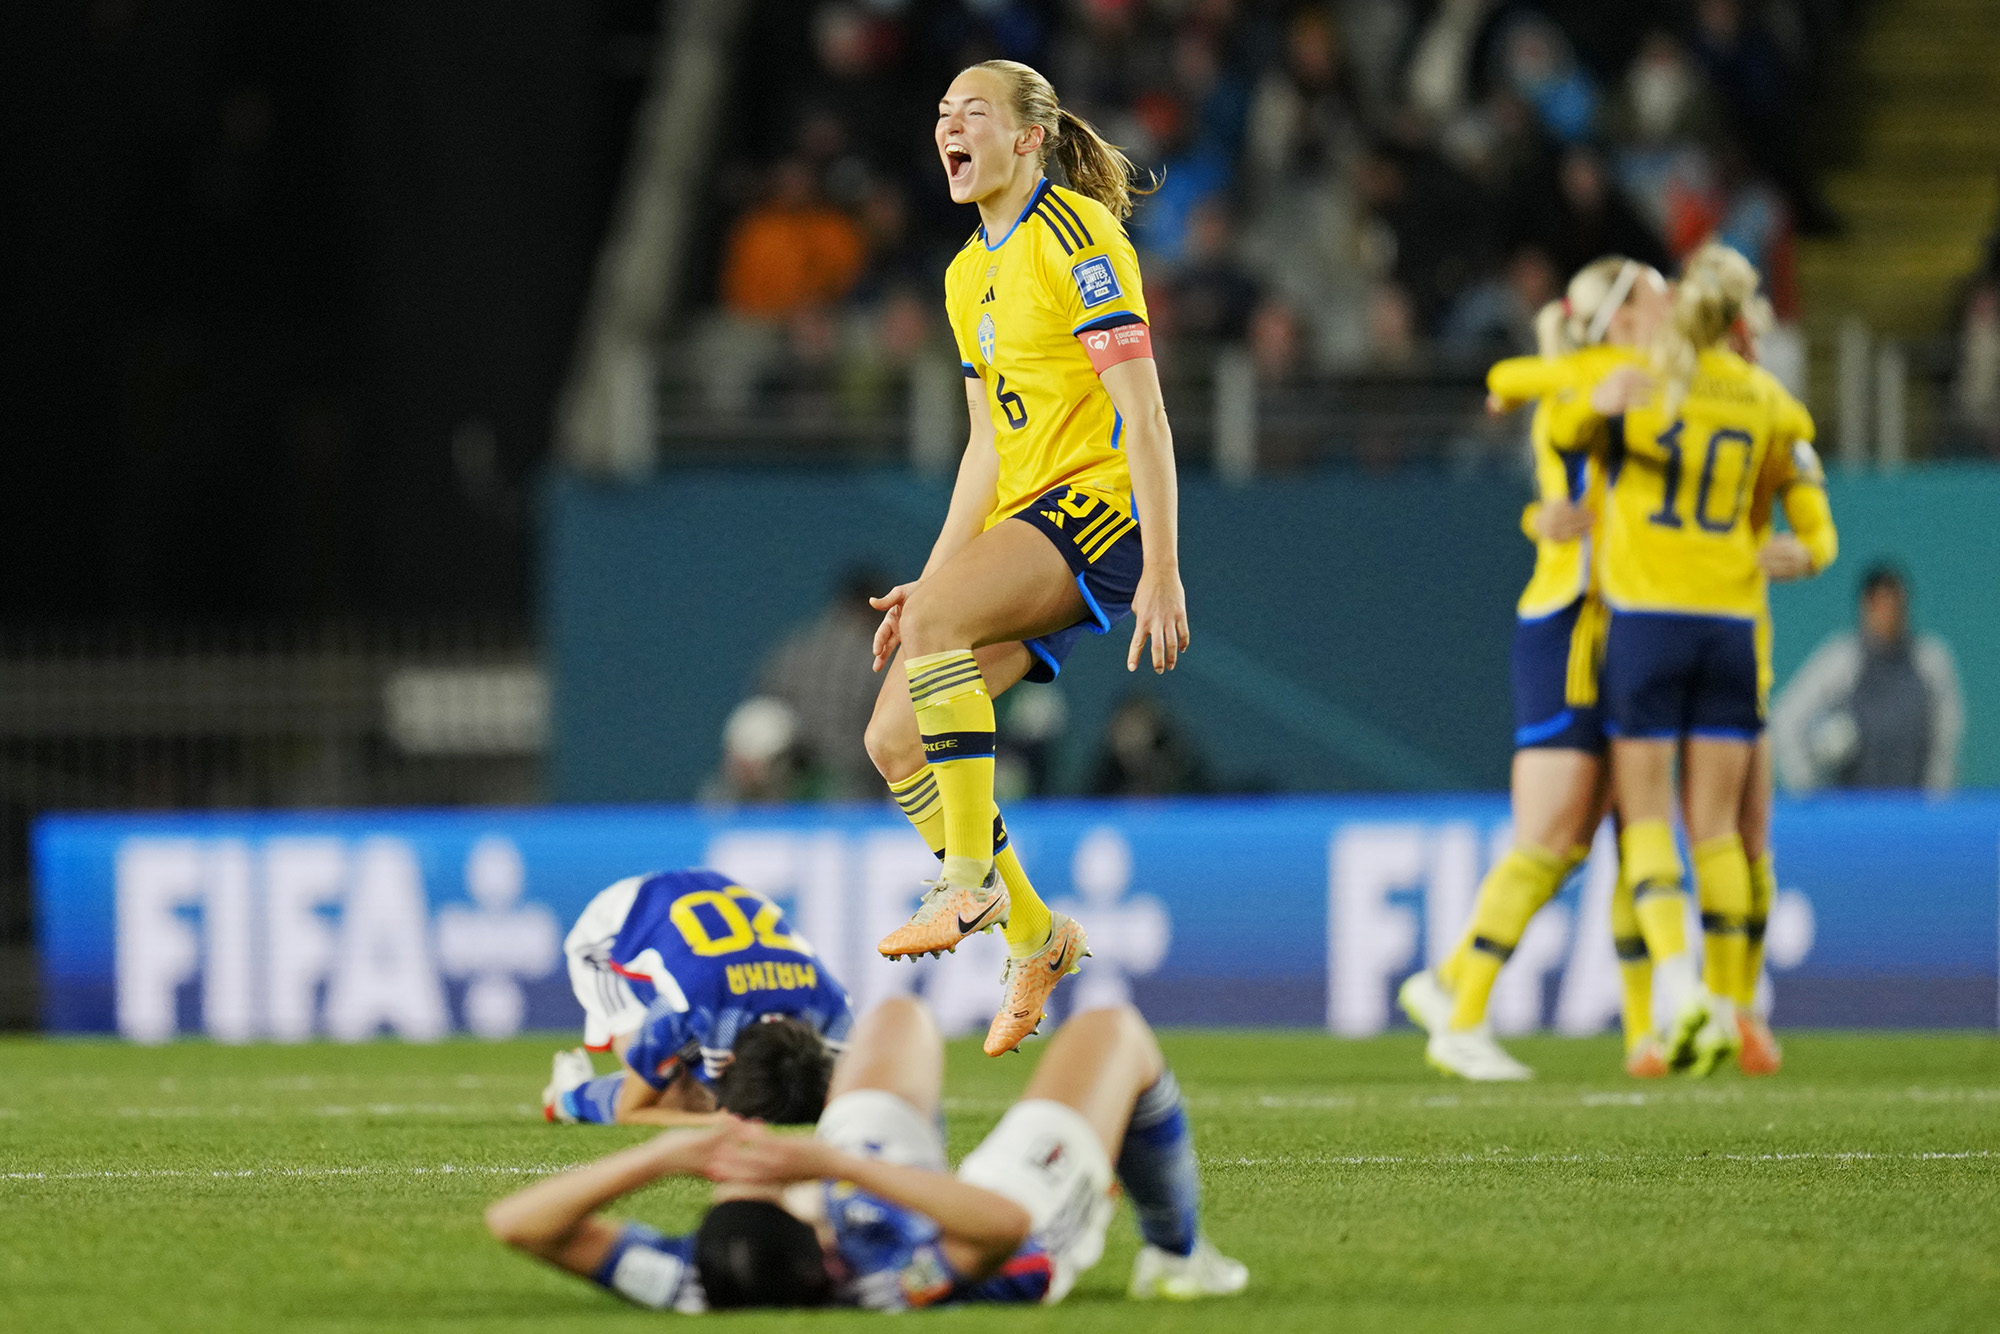 Sweden's Magdalena Eriksson celebrates at the end of the Women's World Cup quarterfinal soccer match between Japan and Sweden at Eden Park in Auckland, New Zealand.